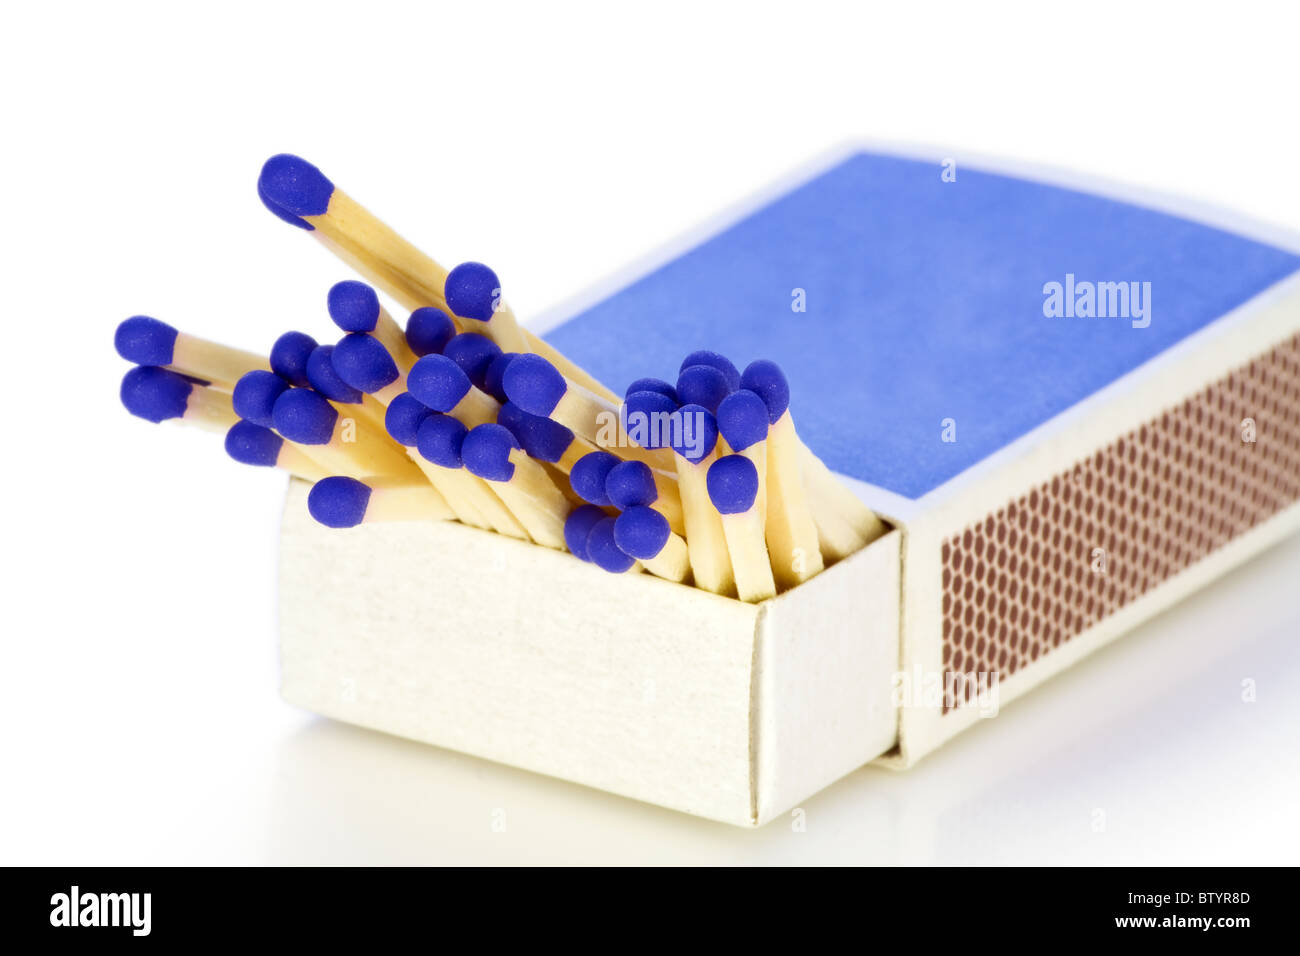 Matches with dark blue heads Stock Photo